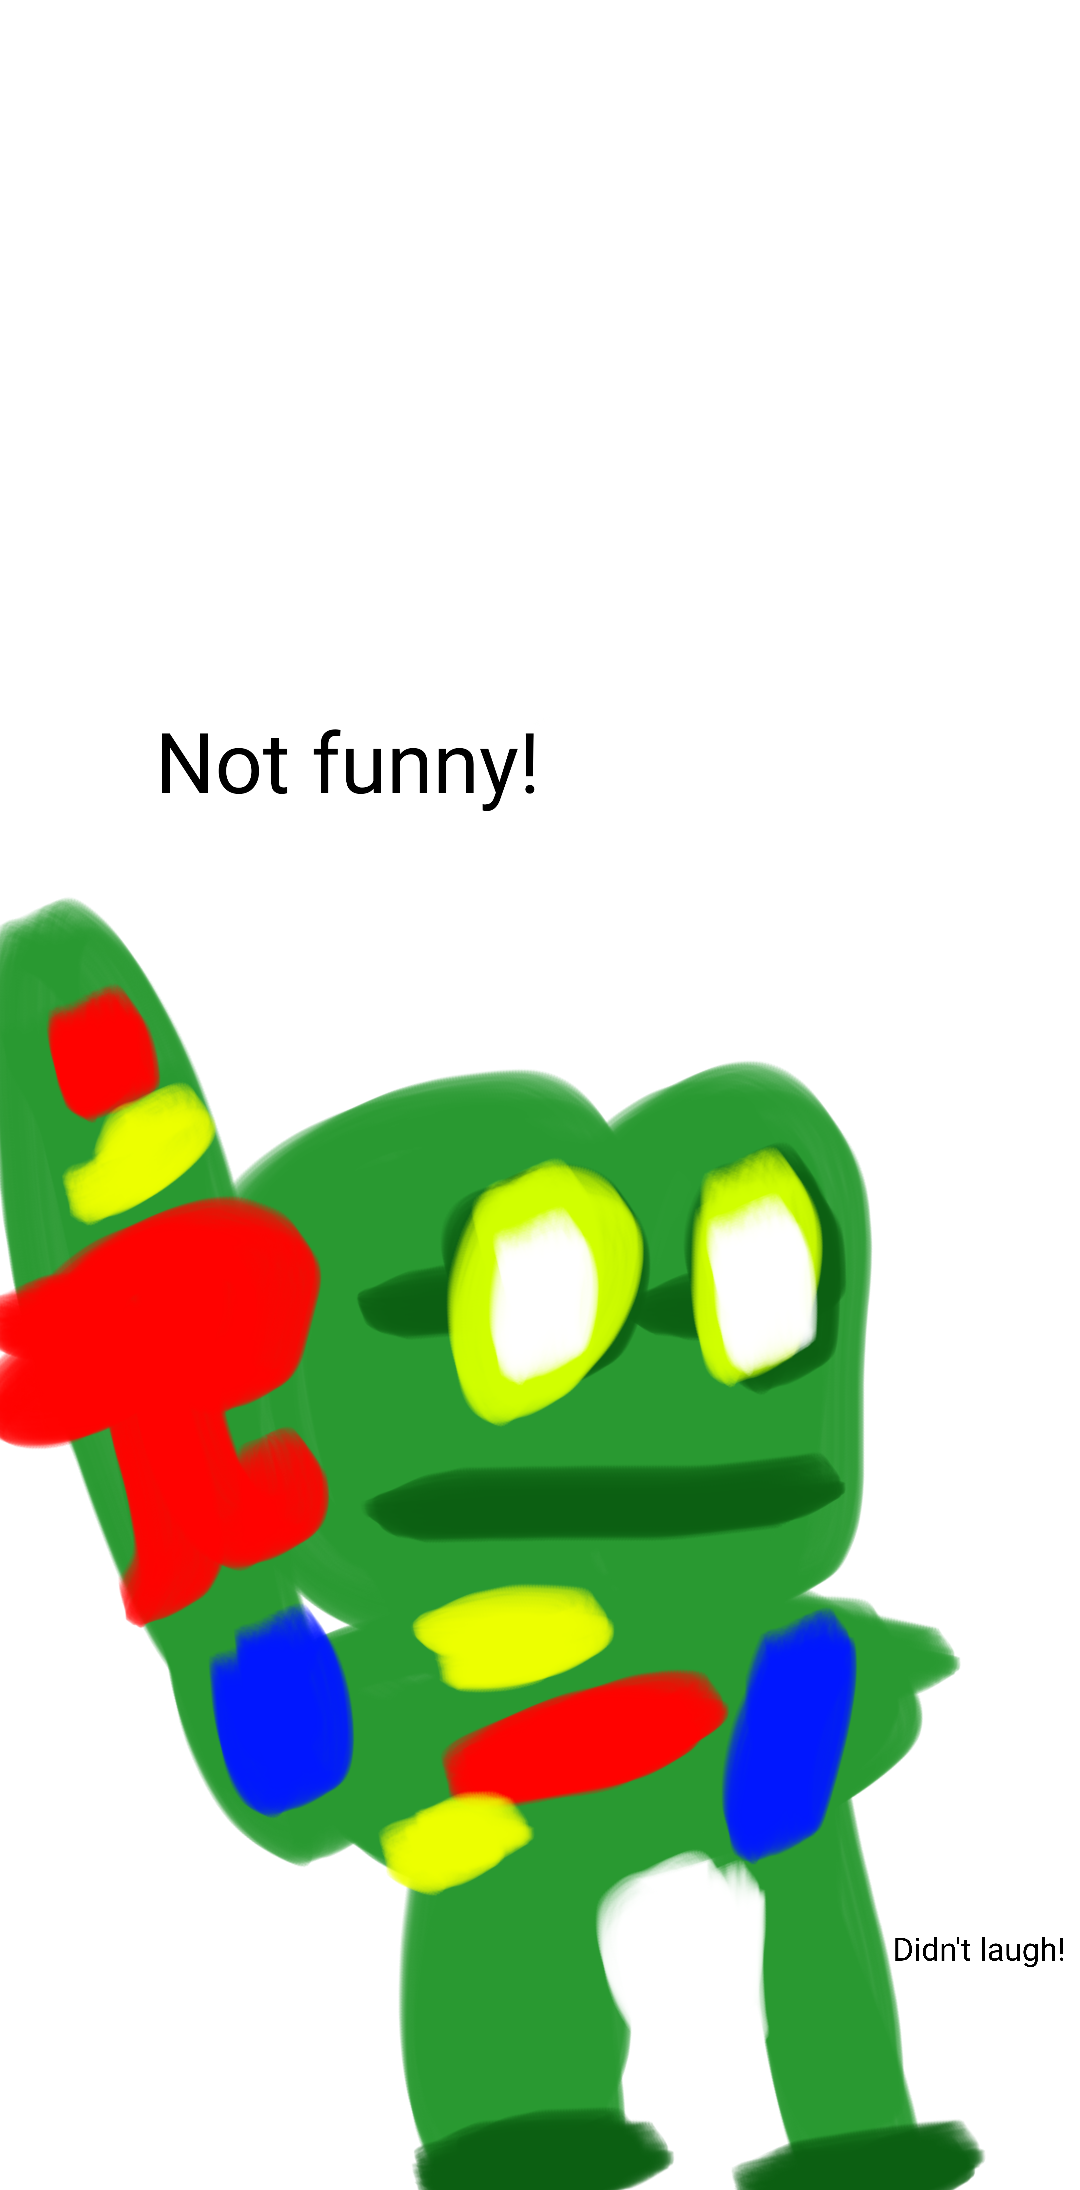 High Quality Wreath Reptire almost explode but says not funny didn't laugh Blank Meme Template